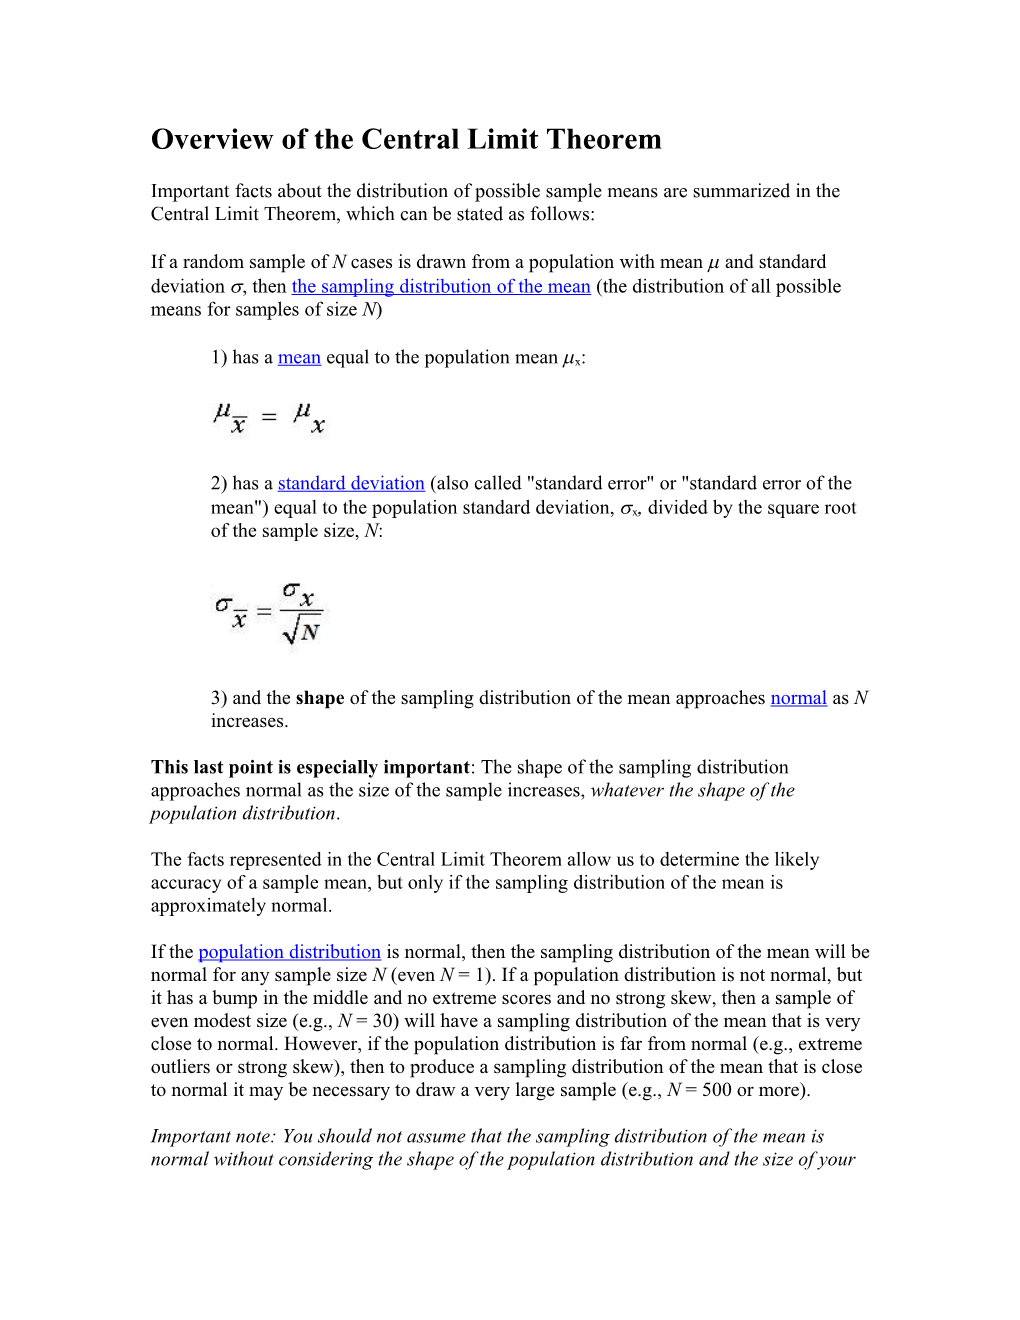 Overview of the Central Limit Theorem